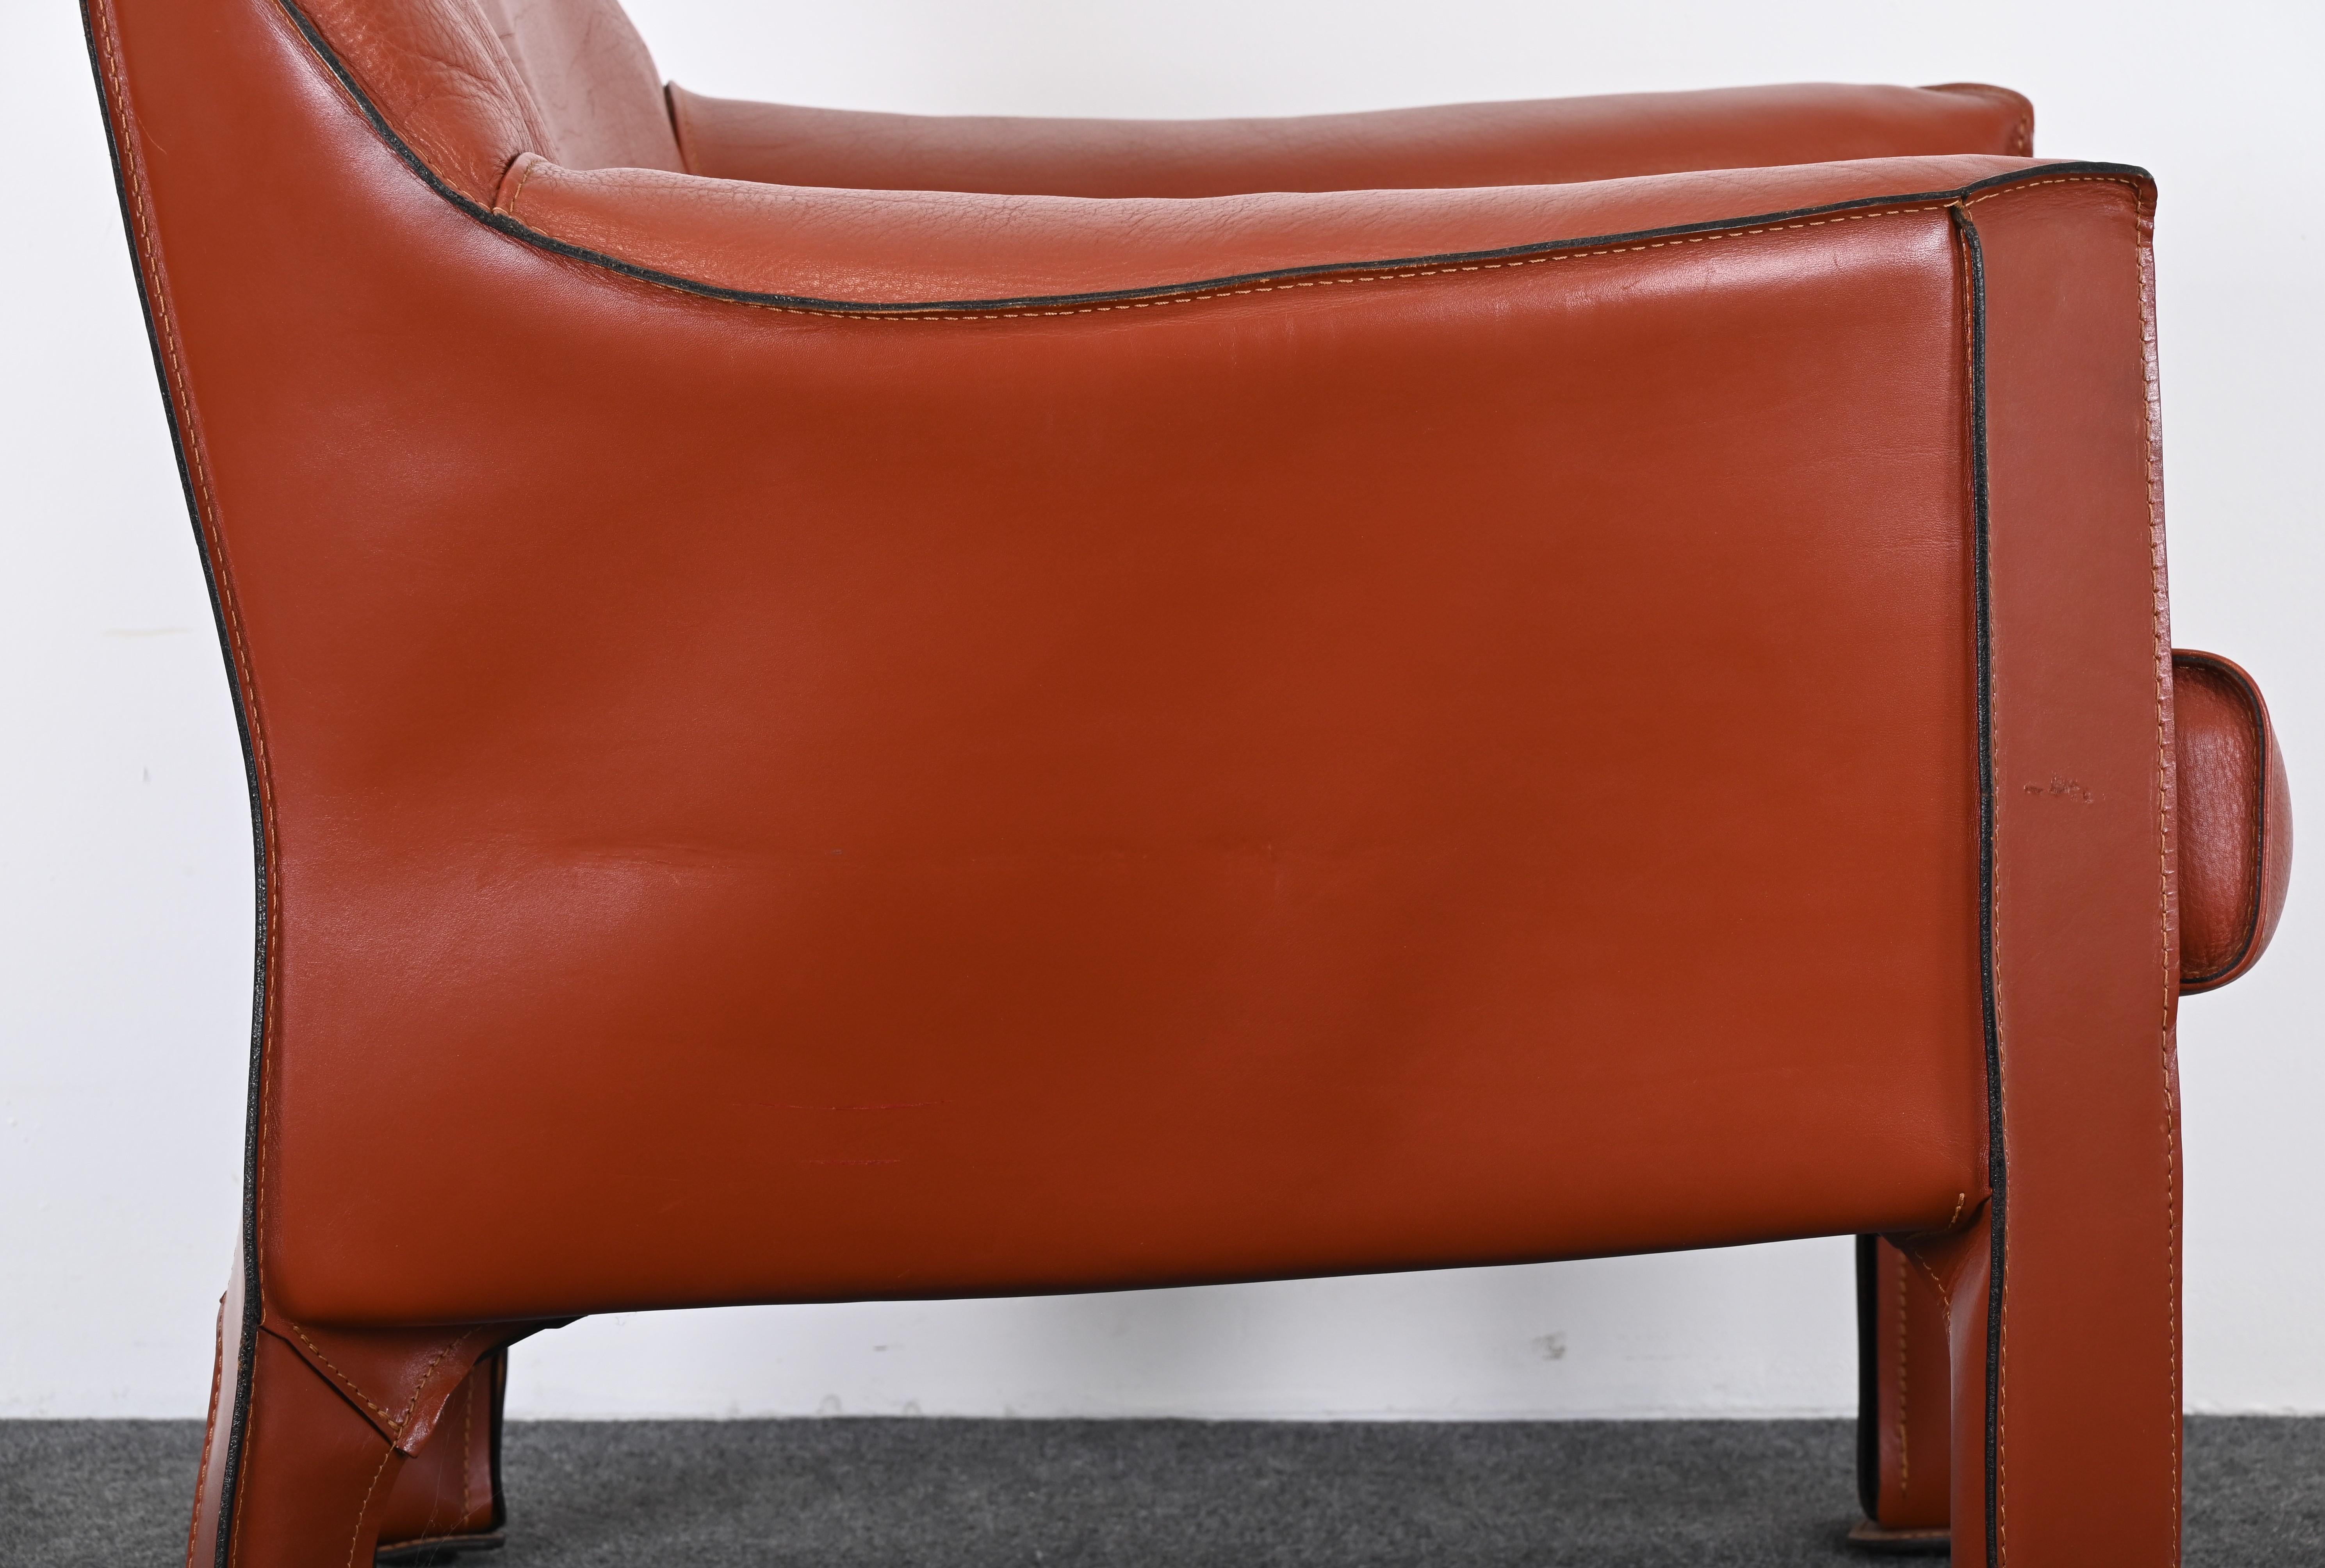 Cassina Cab Chair 415 Designed by Mario Bellini, No Longer in Production 1